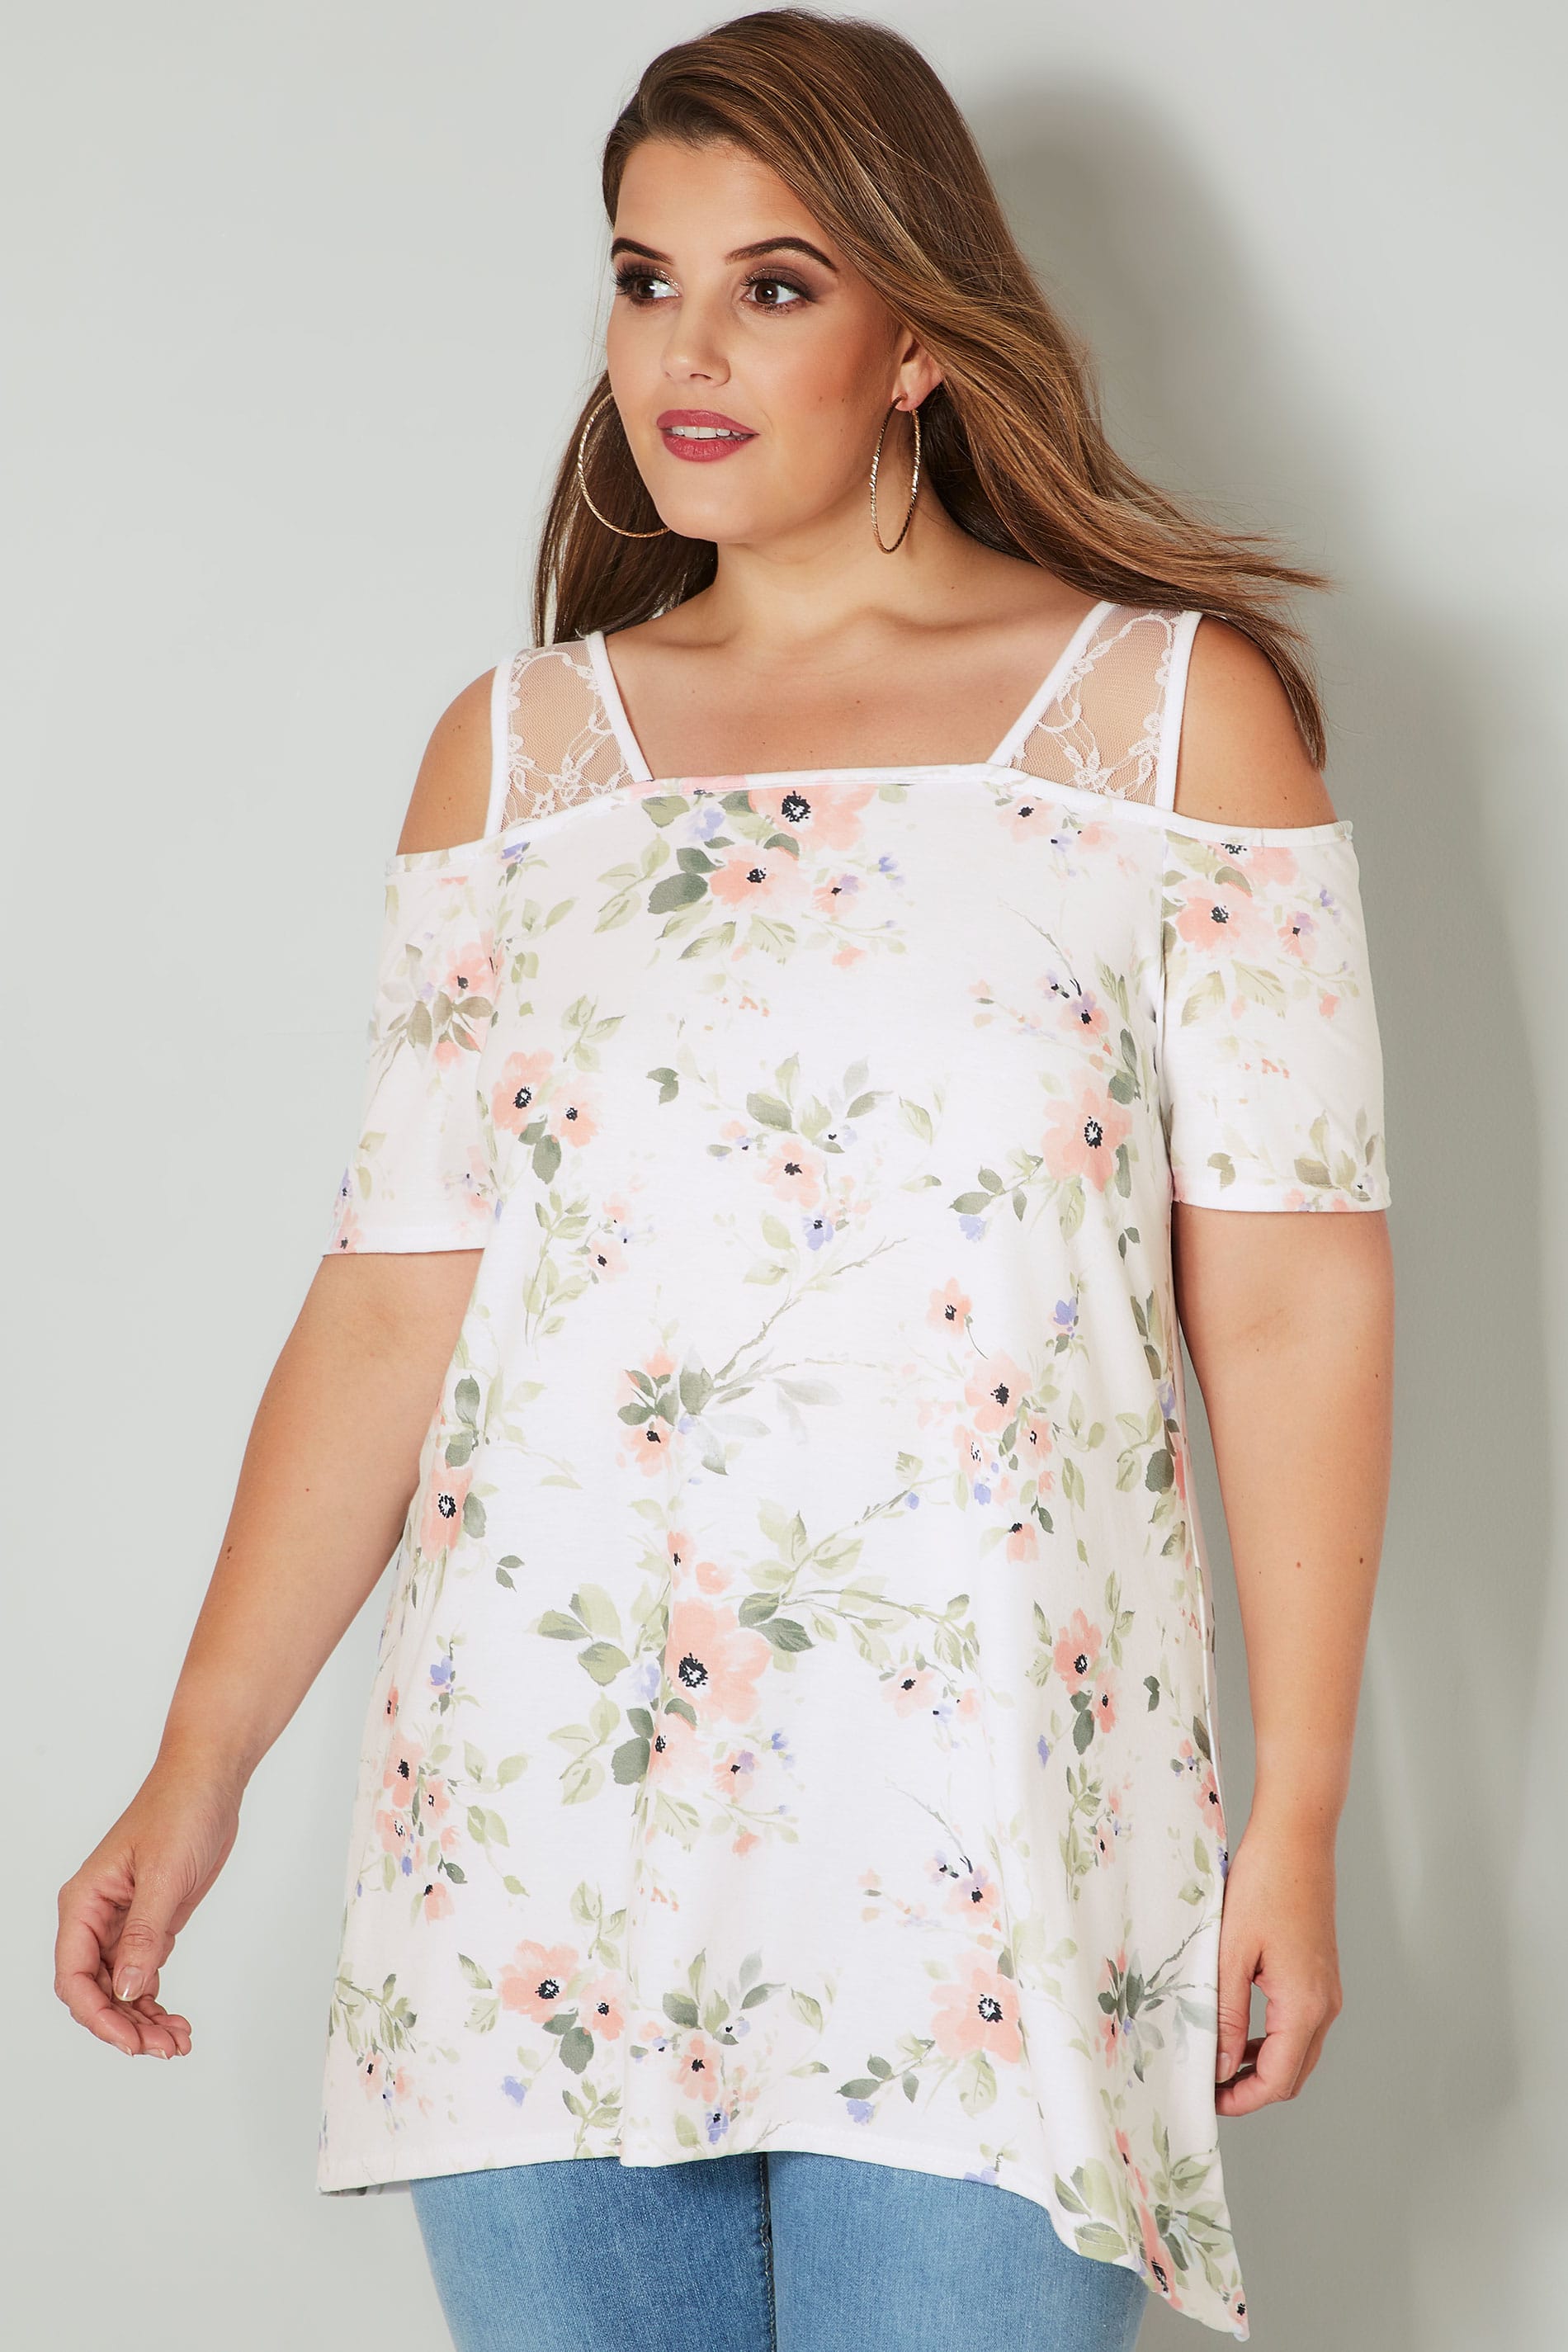 Ivory Floral Lace Cold Shoulder Top, Plus size 16 to 36